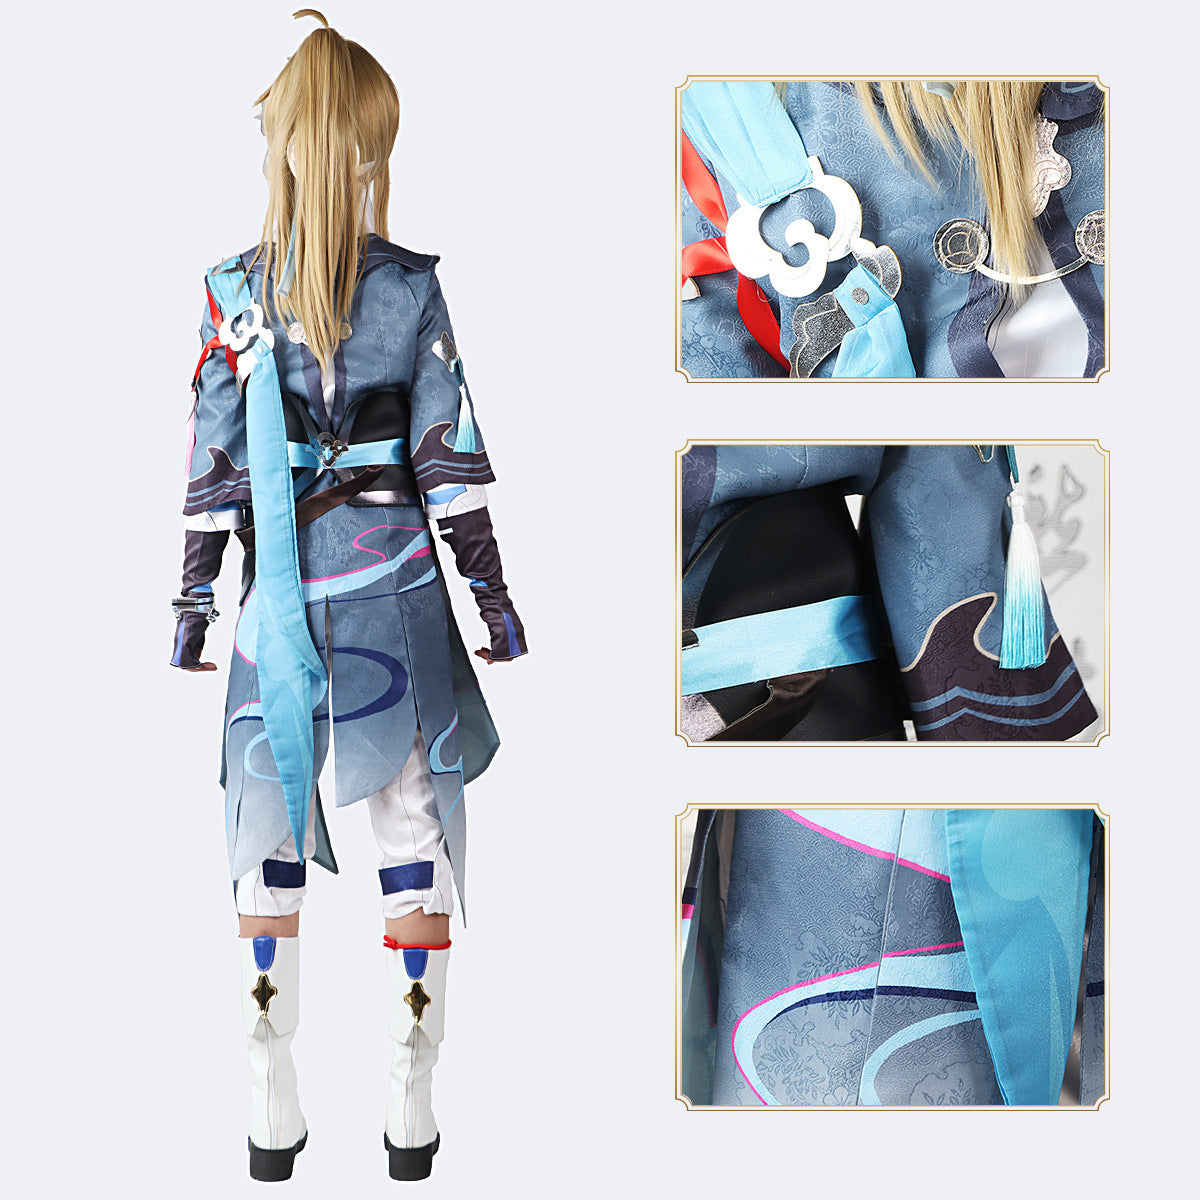 Rulercosplay Honkai Star Rail Yanqing Uniform Suit Cosplay Costume With Accessories For Halloween Party